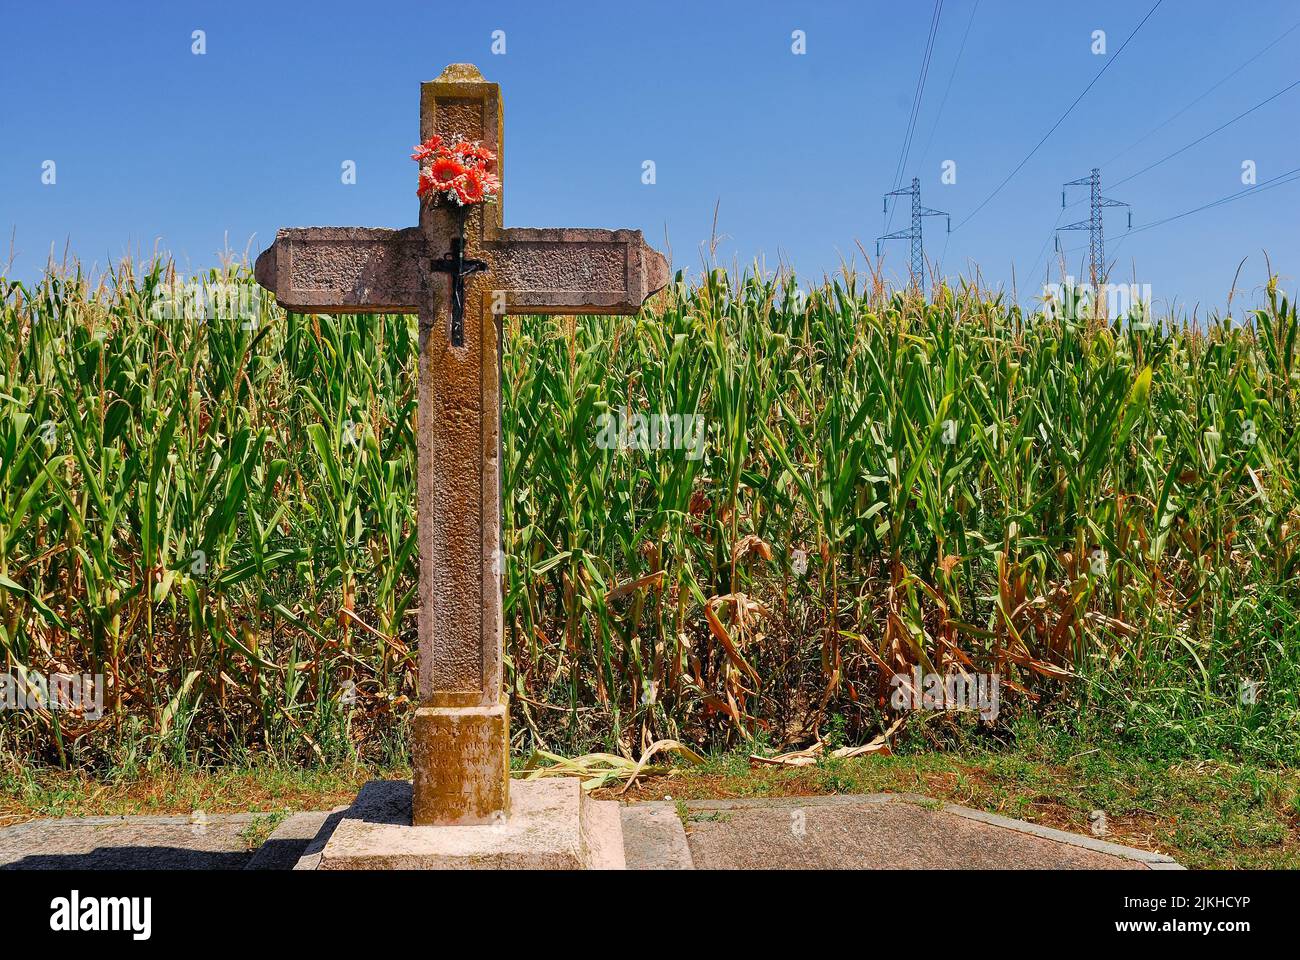 Veneto countryside, The drought affecting Northern Italy shows no sign of abating. After 200 days without rain and a winter without snow, the level of the rivers is at an all-time low. Serious damage to agriculture, two thirds of the maize crop was lost. A stone crucifix in a cornfield. Stock Photo